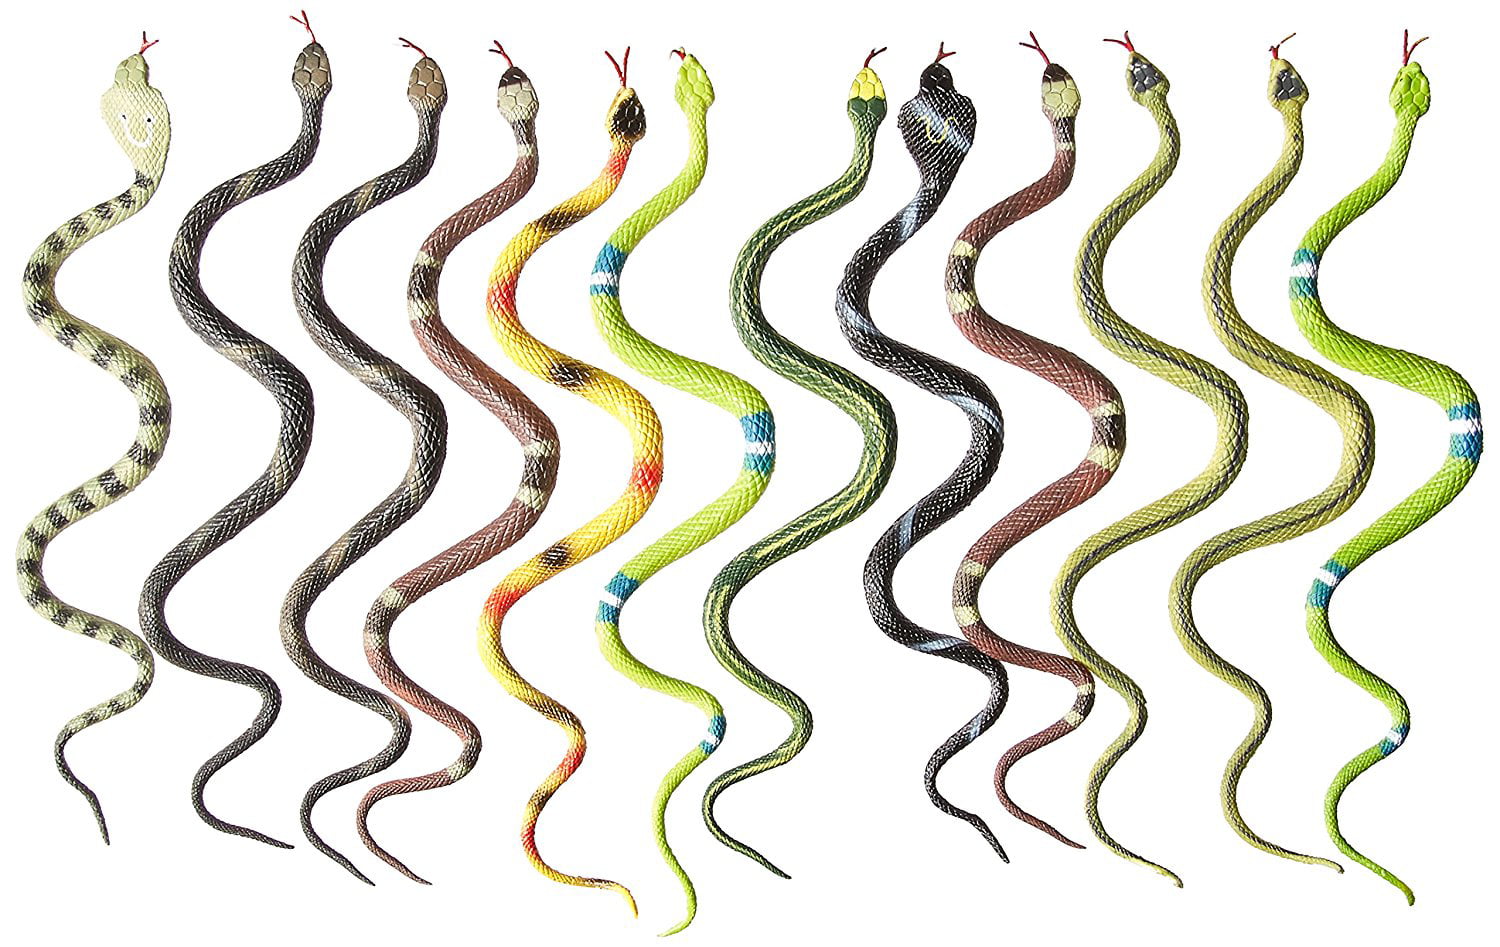 144 NEW RAIN FOREST RUBBER SNAKES KIDS TOY ZOO REPTILE  6" JUNGLE SNAKE PRANK 